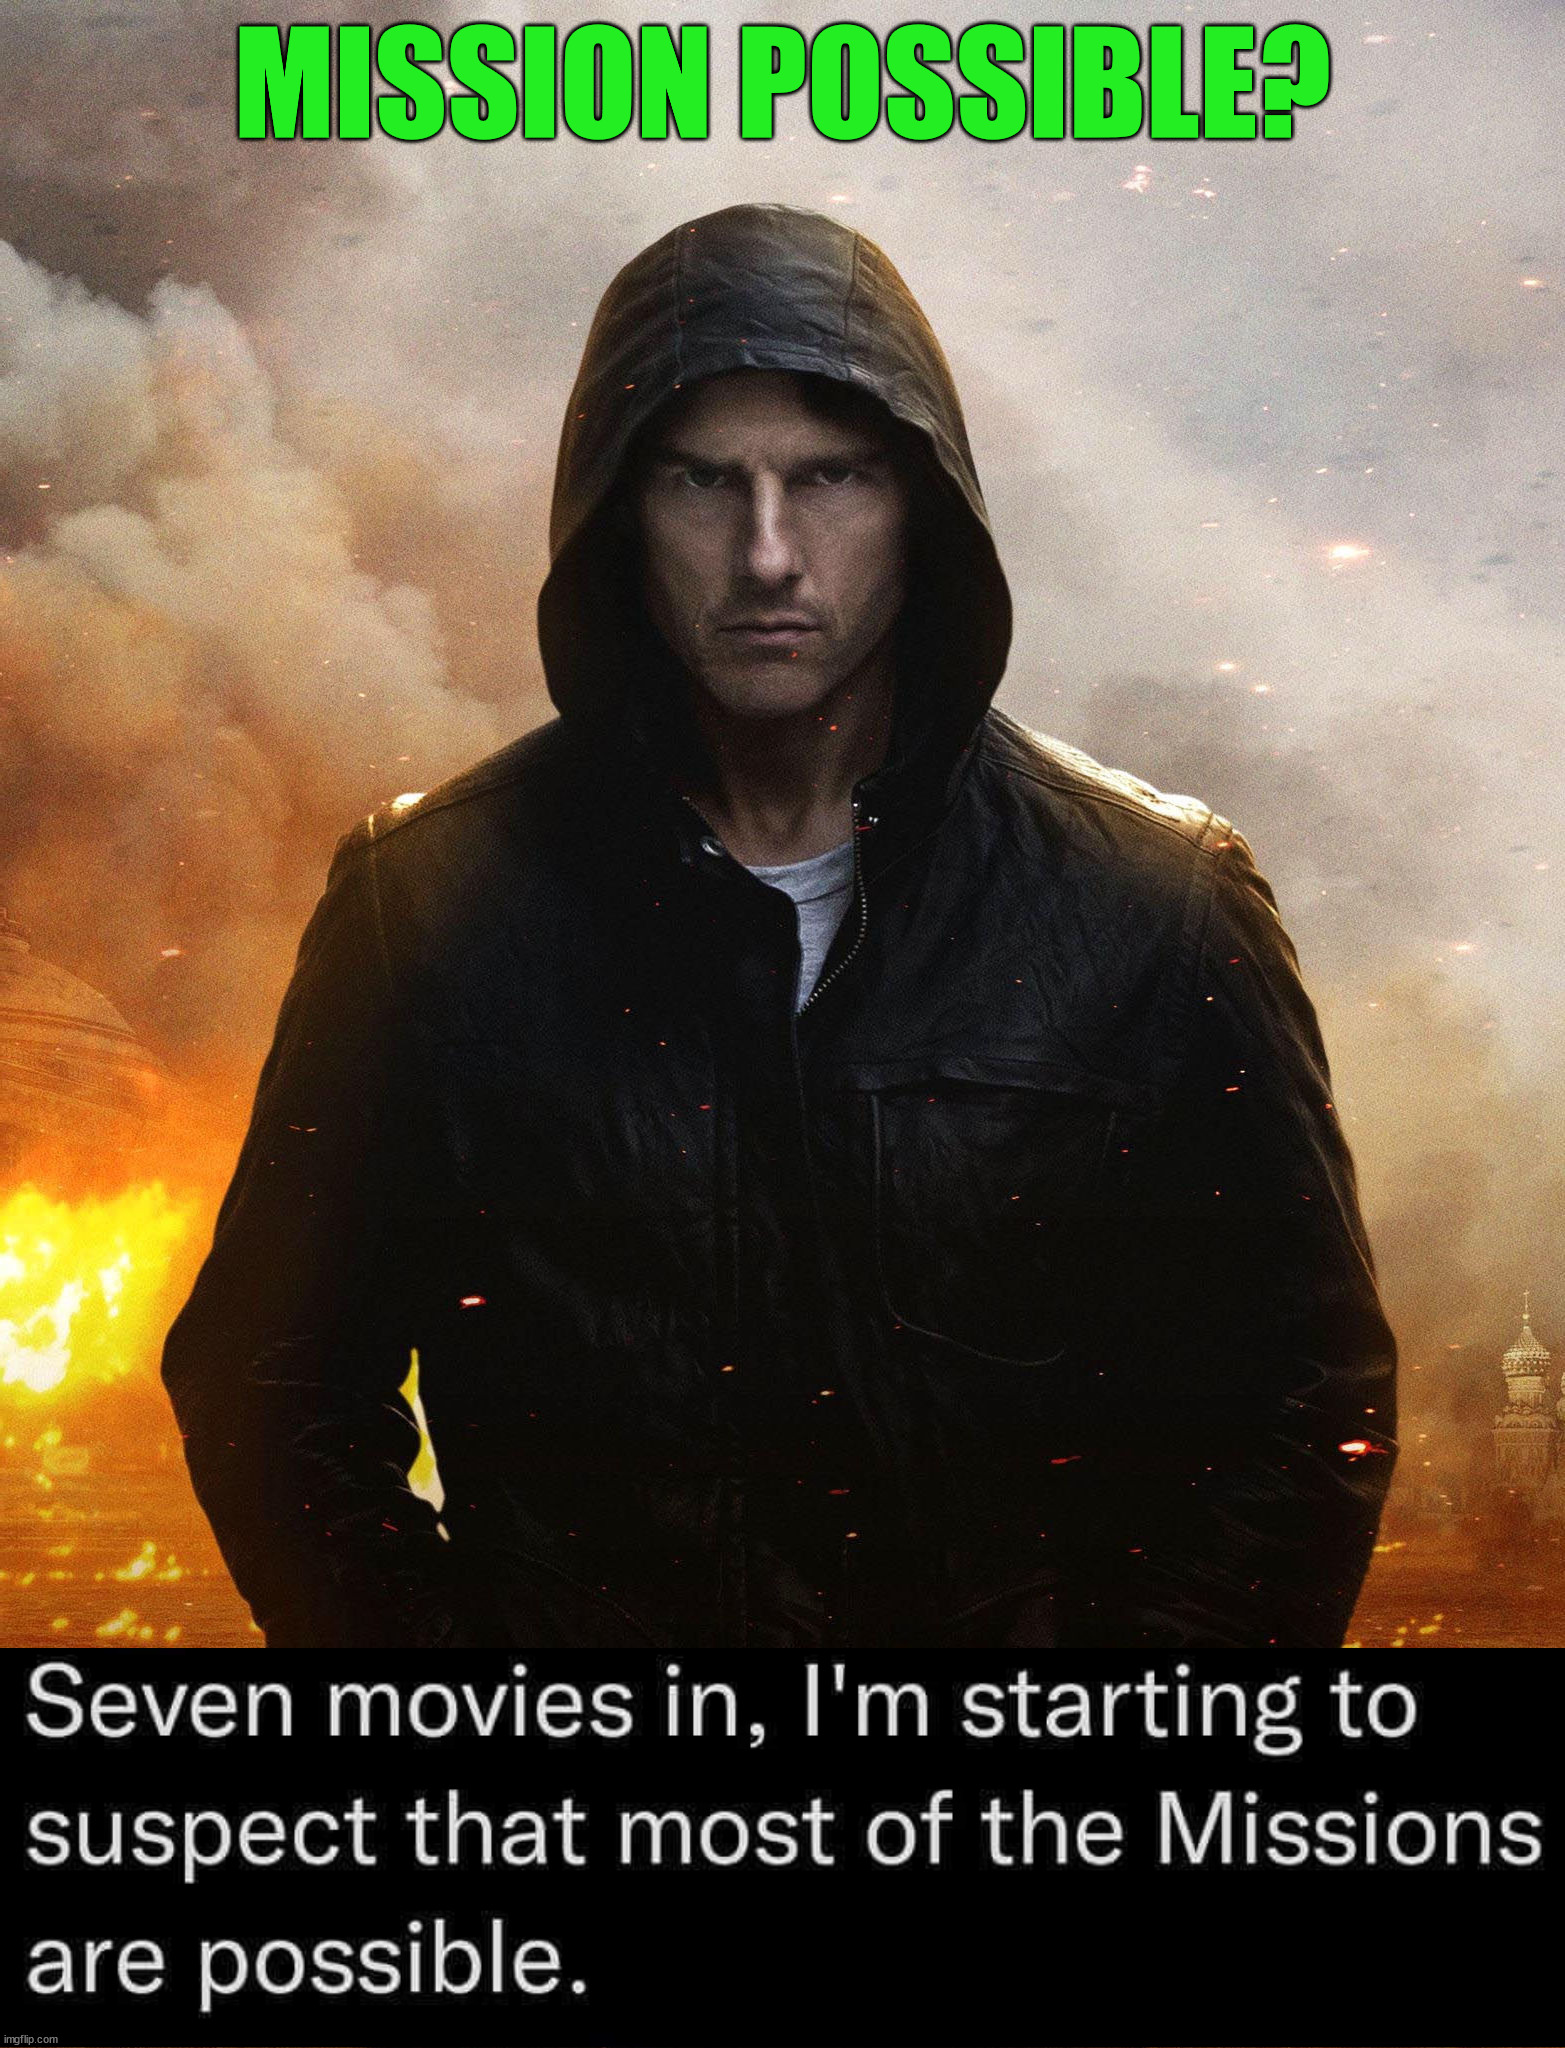 MISSION IMPOSSIBLE | MISSION POSSIBLE? | image tagged in mission impossible | made w/ Imgflip meme maker